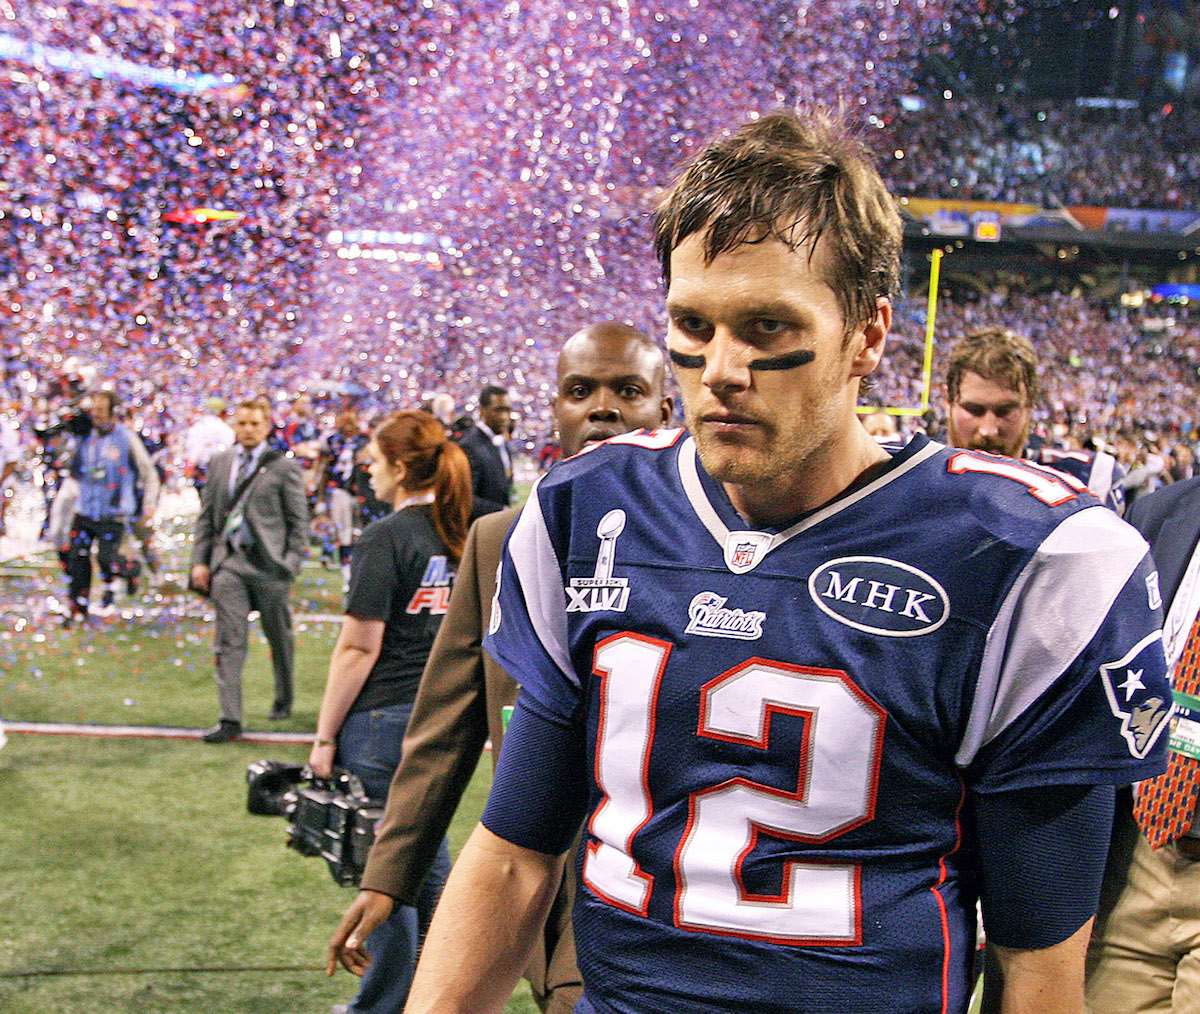 Tom Brady as he leaves the field after losing to the New York Giants in Super Bowl XLVI